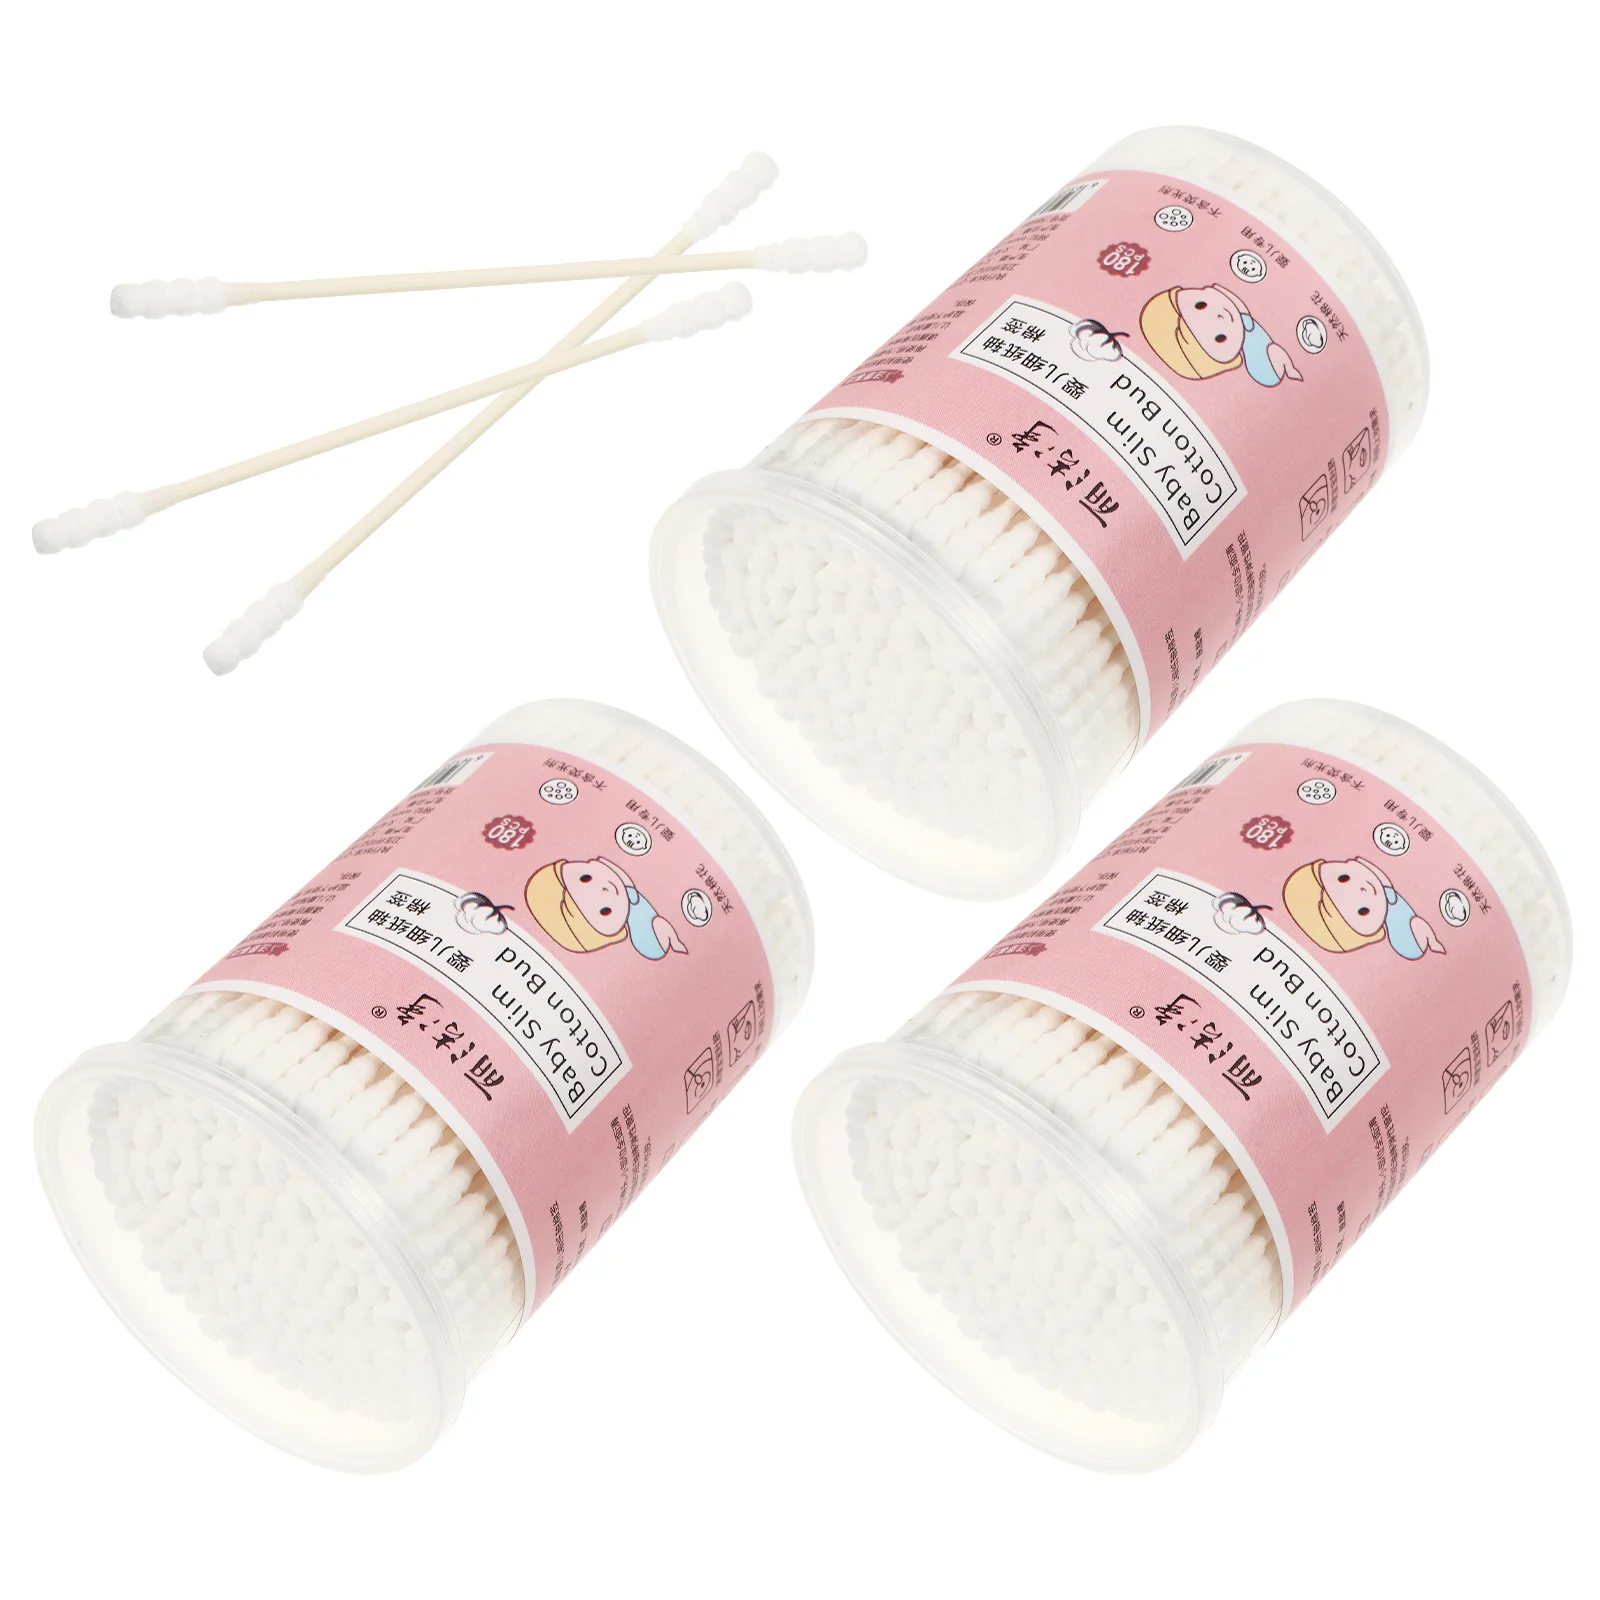 

3 Boxes Cotton Swab Sterile Swabs Double Tipped Multifunction Safety Buds Ear Cleaning Absorbent Handle Child Disposable vaapes